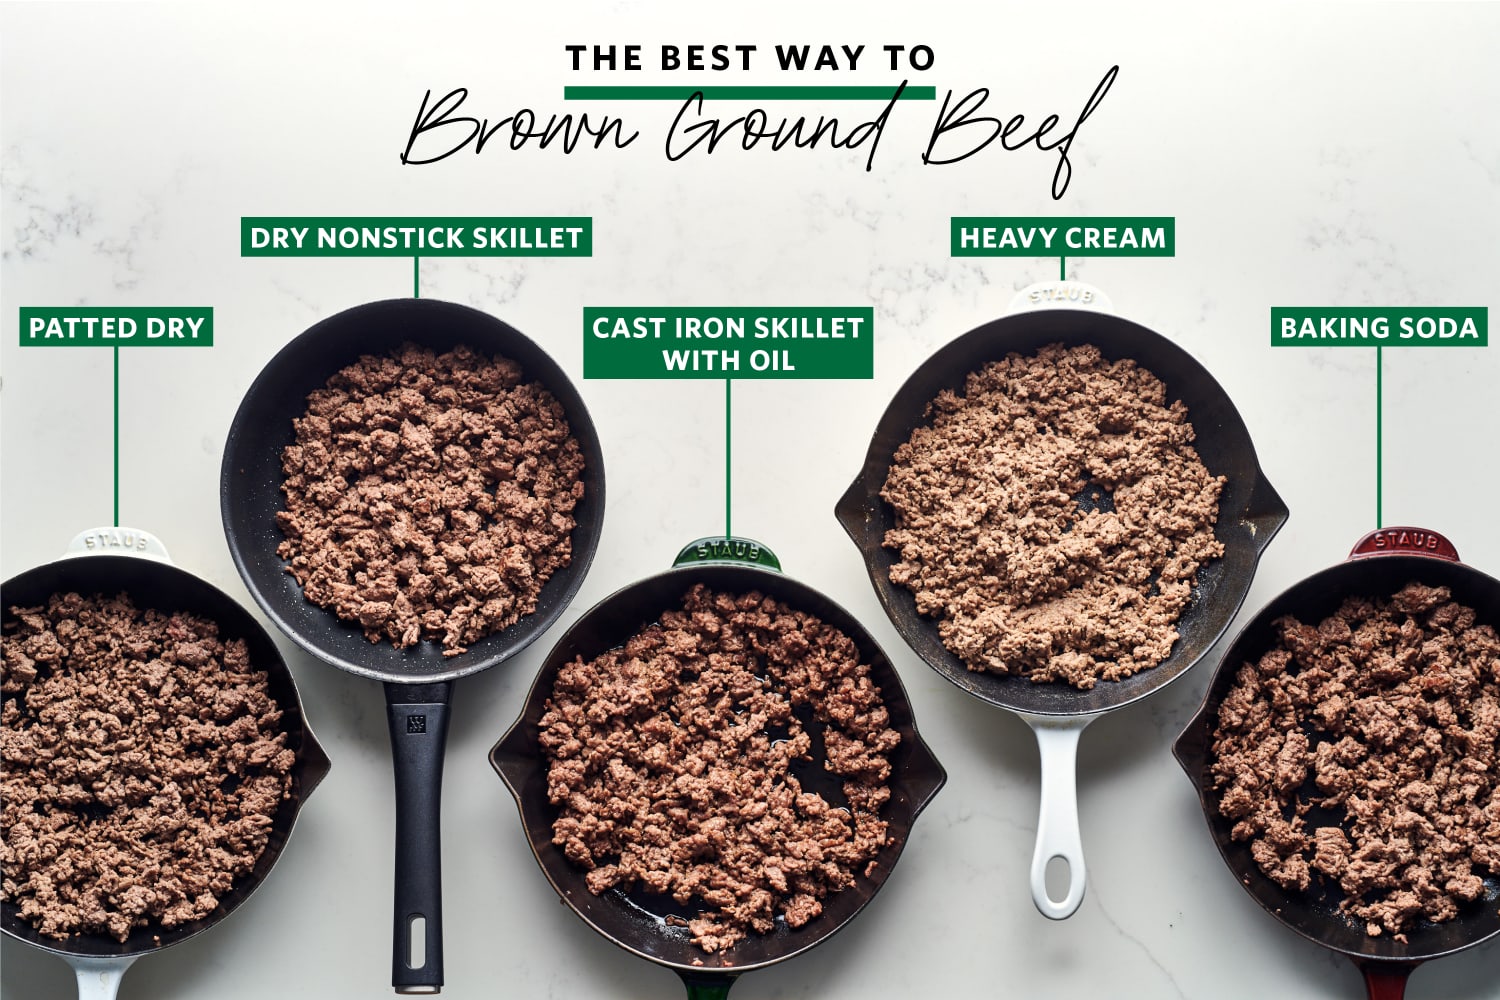 We Tried 5 Methods for Browning Ground Beef and the Winner Is a Game-Changer